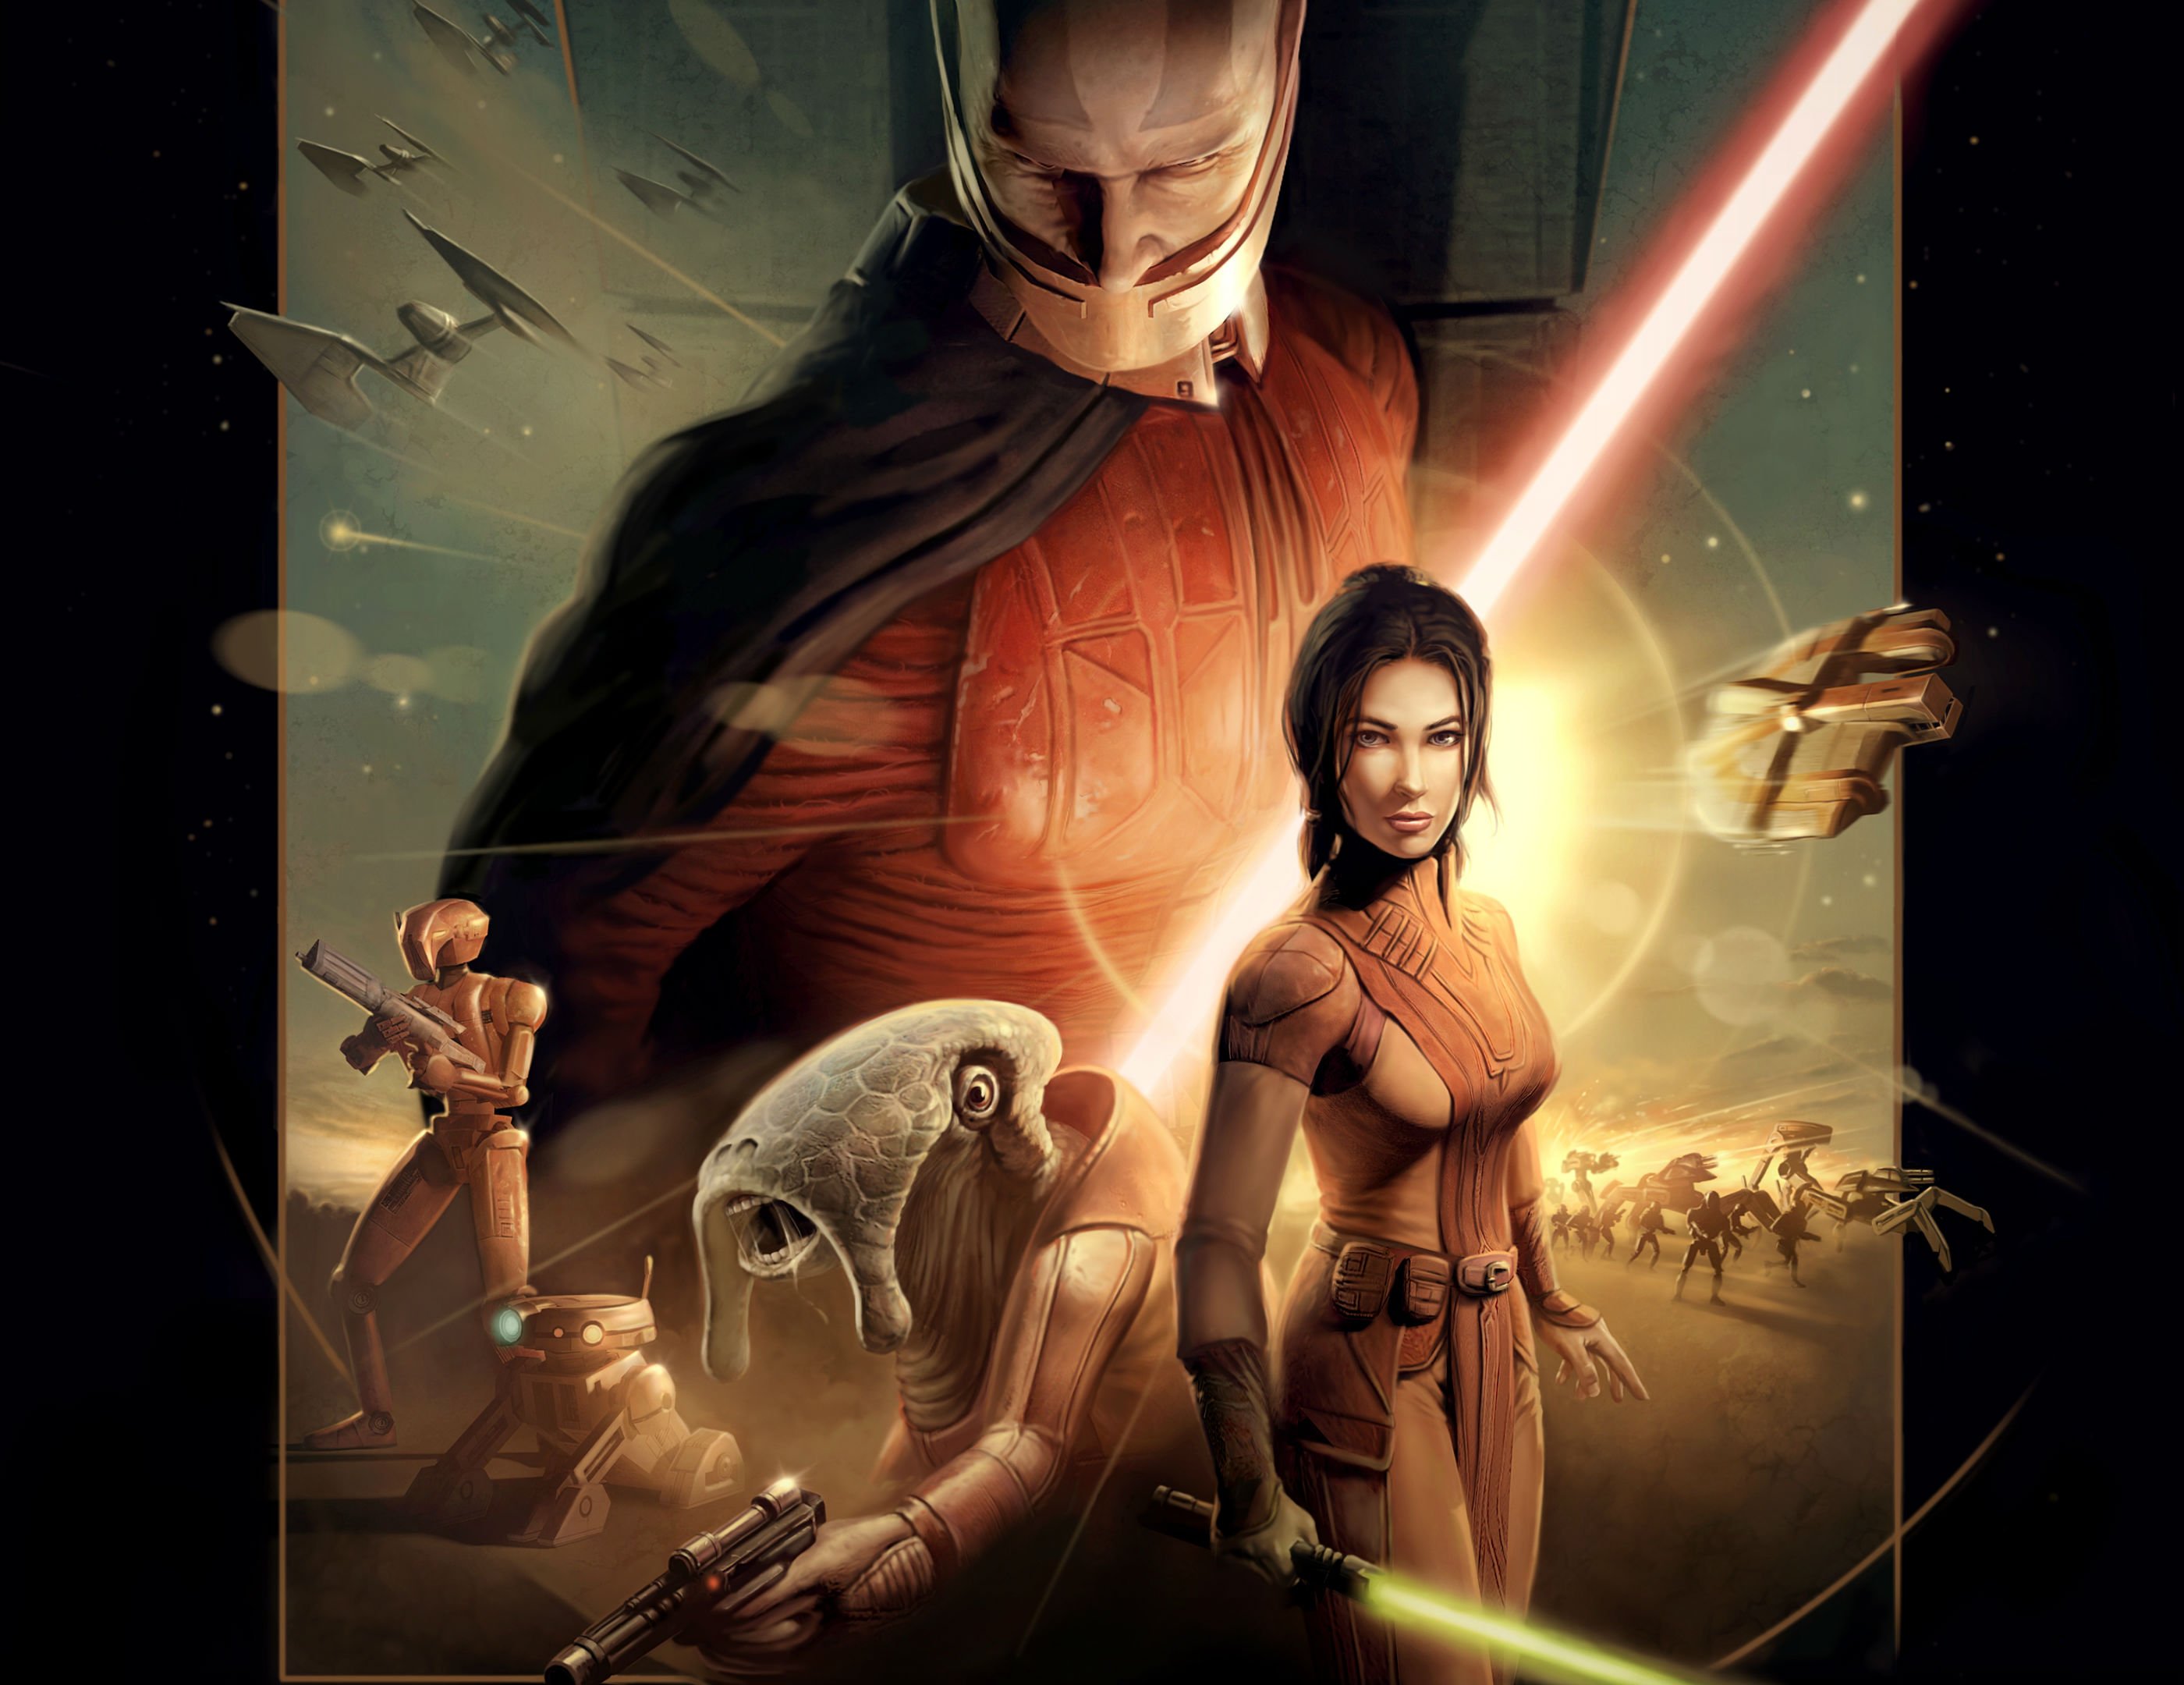 Star wars knights of the old republic русификатор steam фото 22